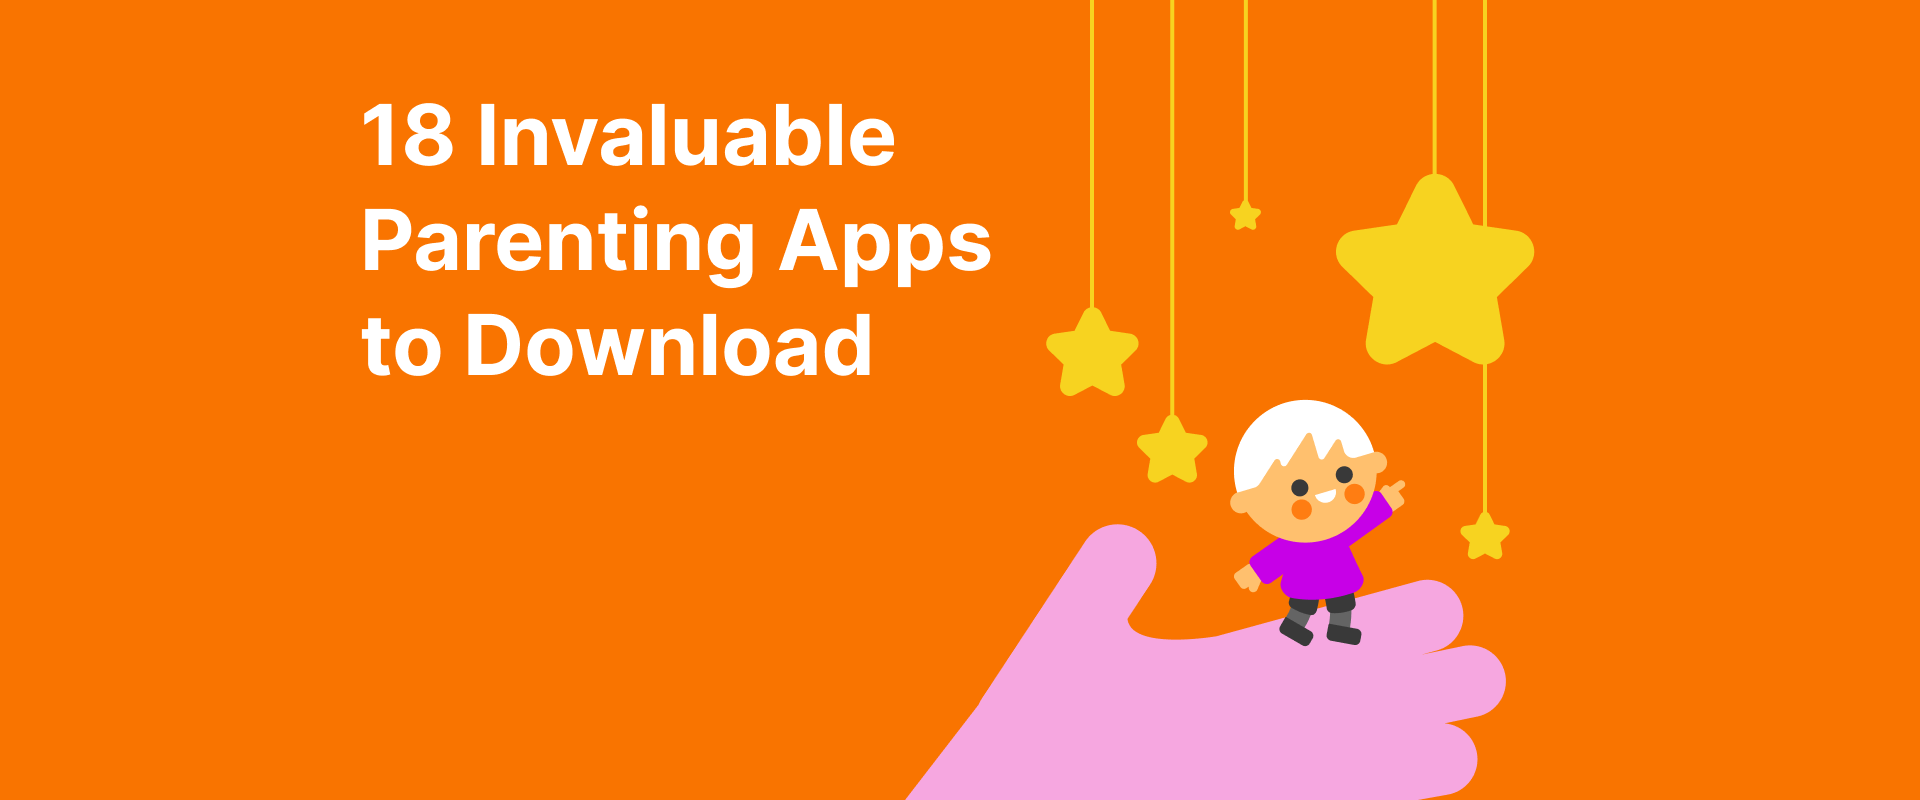 18 Invaluable parenting apps to download